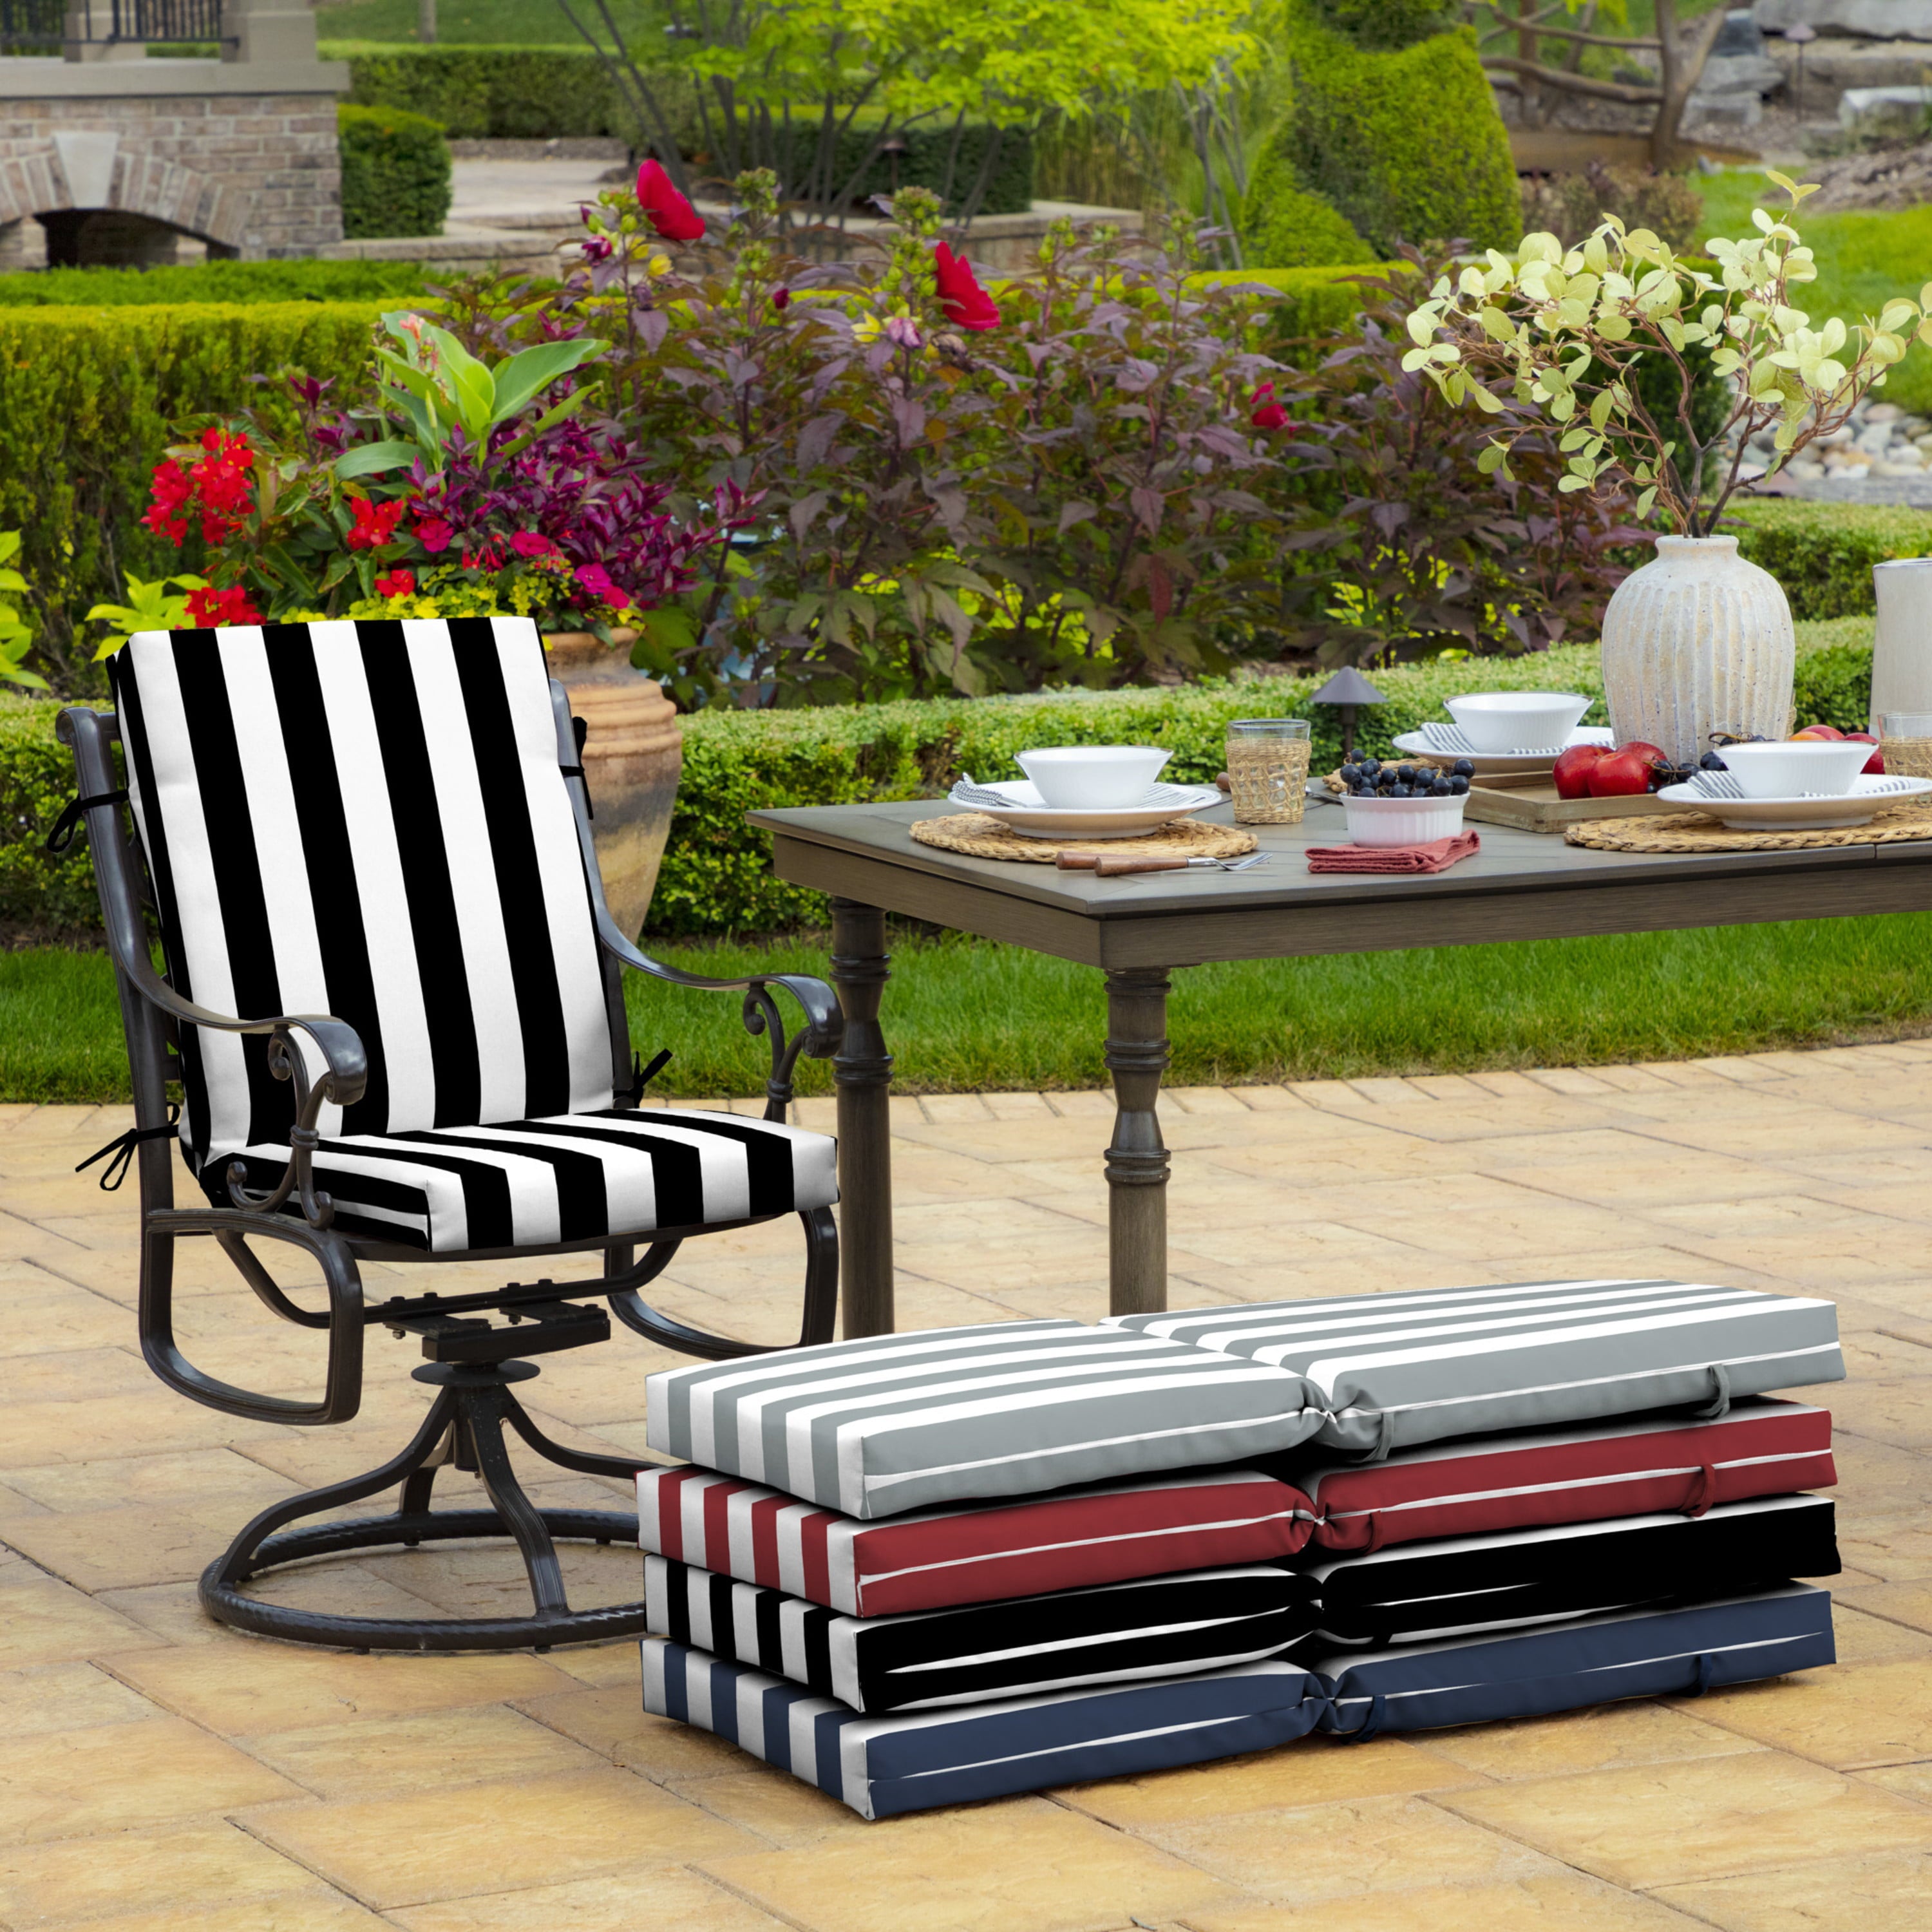 Arden Selections Outdoor Dining Chair Cushion 20 x 20， Black Cabana Stripe